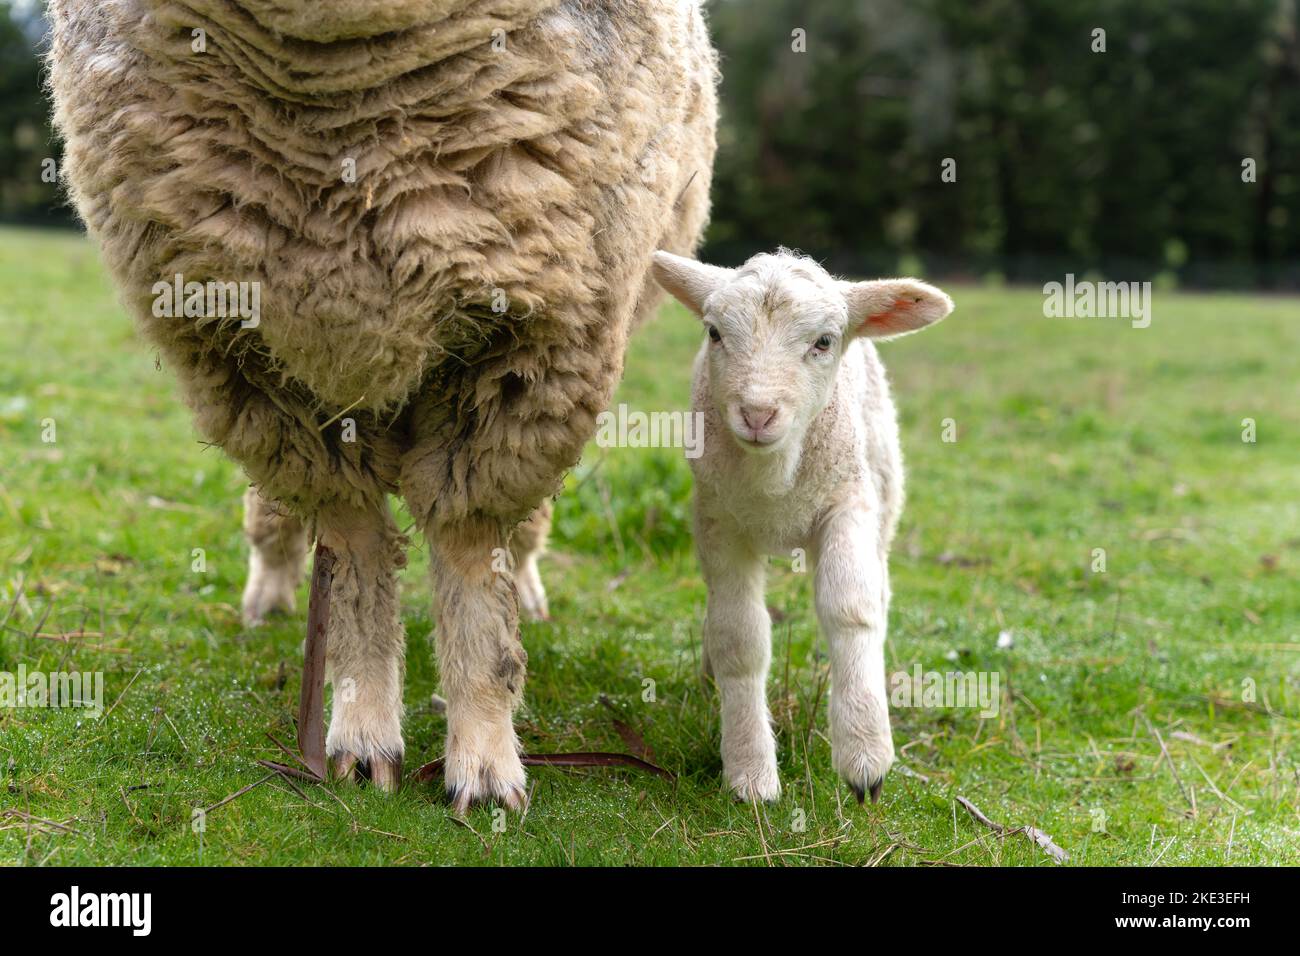 A three day old white Dorper x Merino lamb standing beside its mother Stock Photo